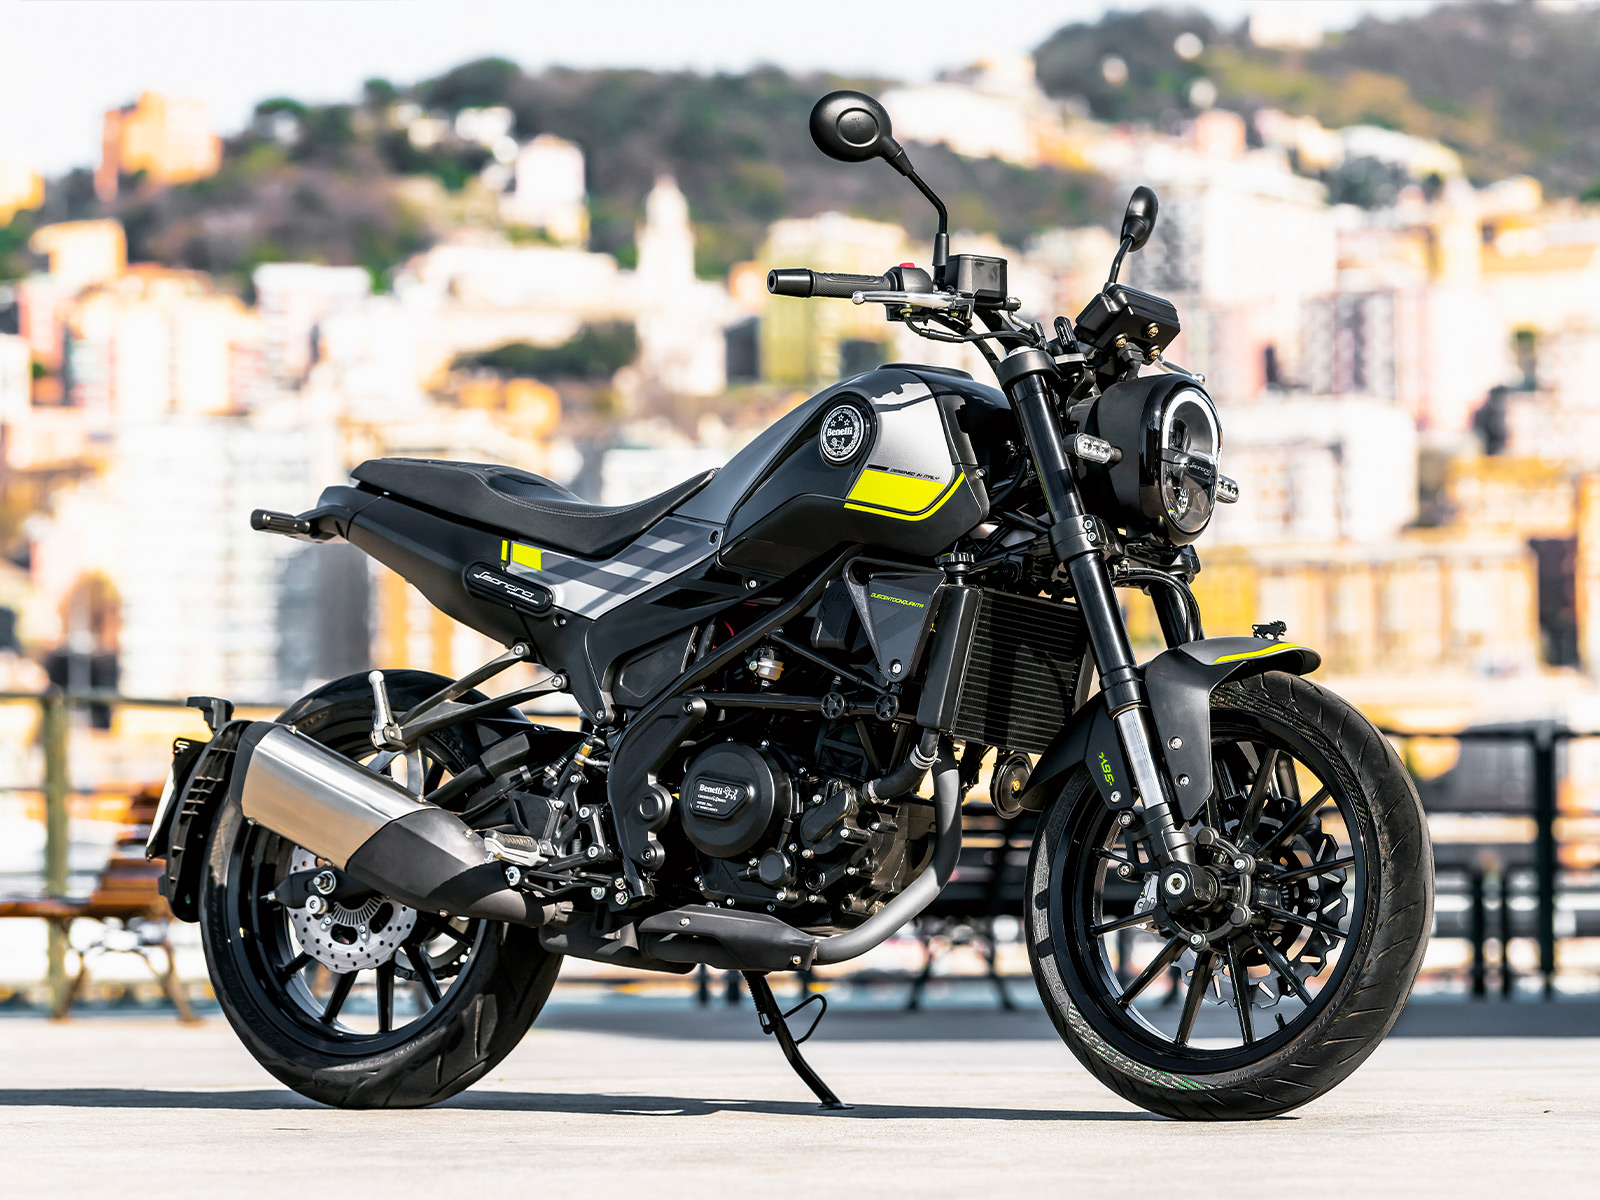 Benelli Leoncino’s New 250cc Motorcycle Offers Safety, Speed, And Style